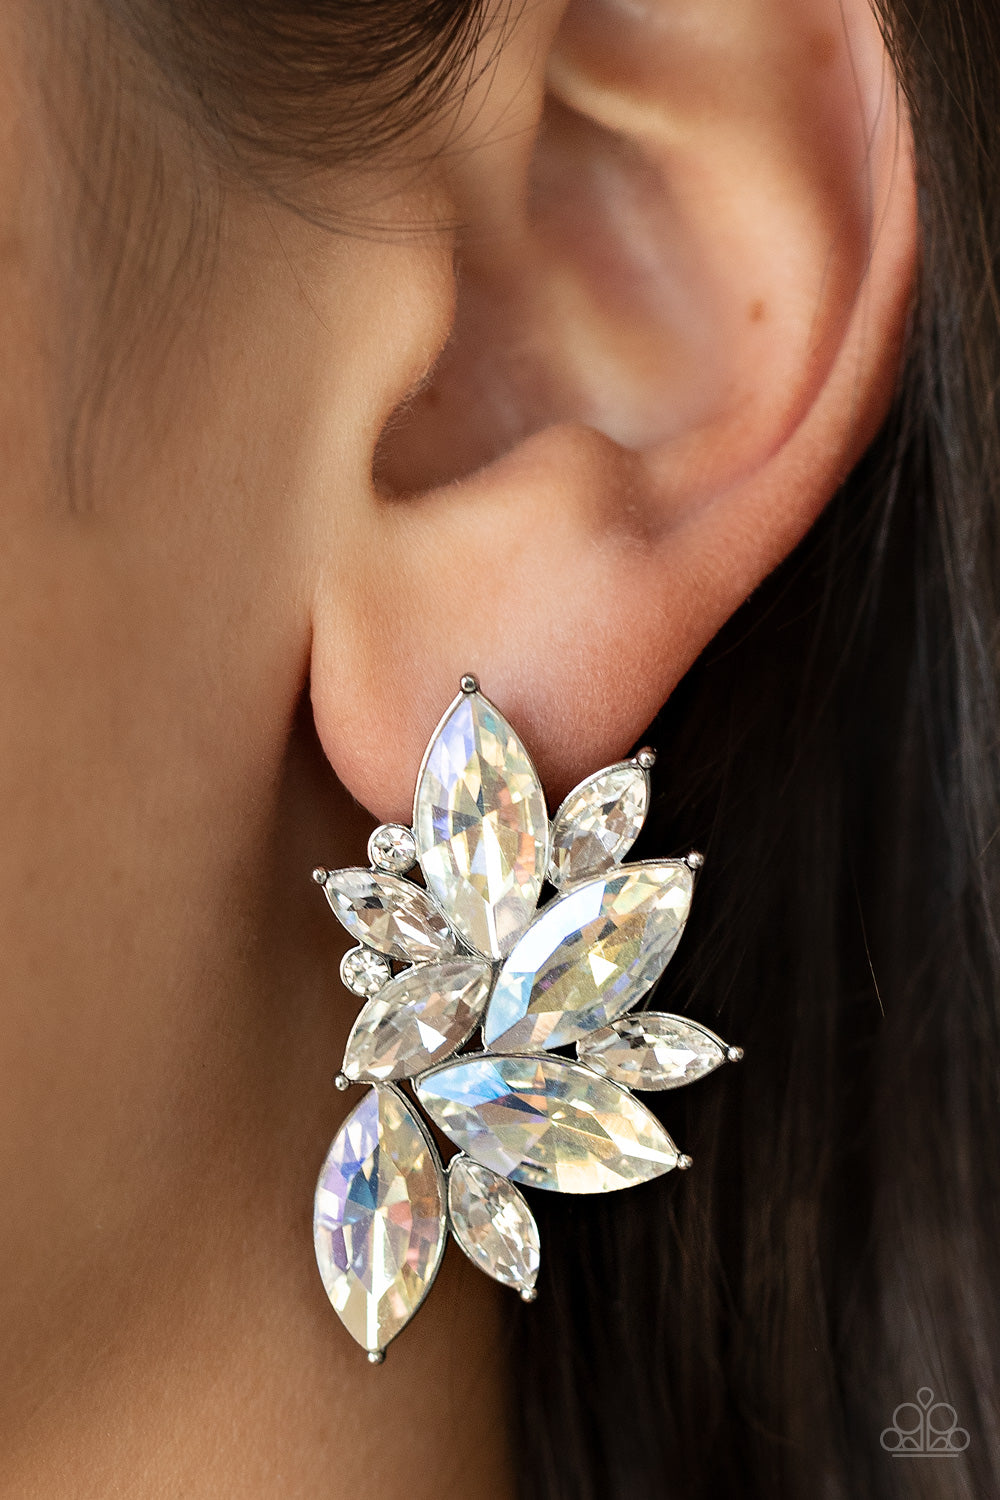 Instant Iridescence White Earring - Paparazzi Accessories  Infused with dainty white rhinestones, a stellar display of iridescent and white marquise cut rhinestones fan out into a spectacular centerpiece. Earring attaches to a standard post fitting.  Sold as one pair of post earrings.